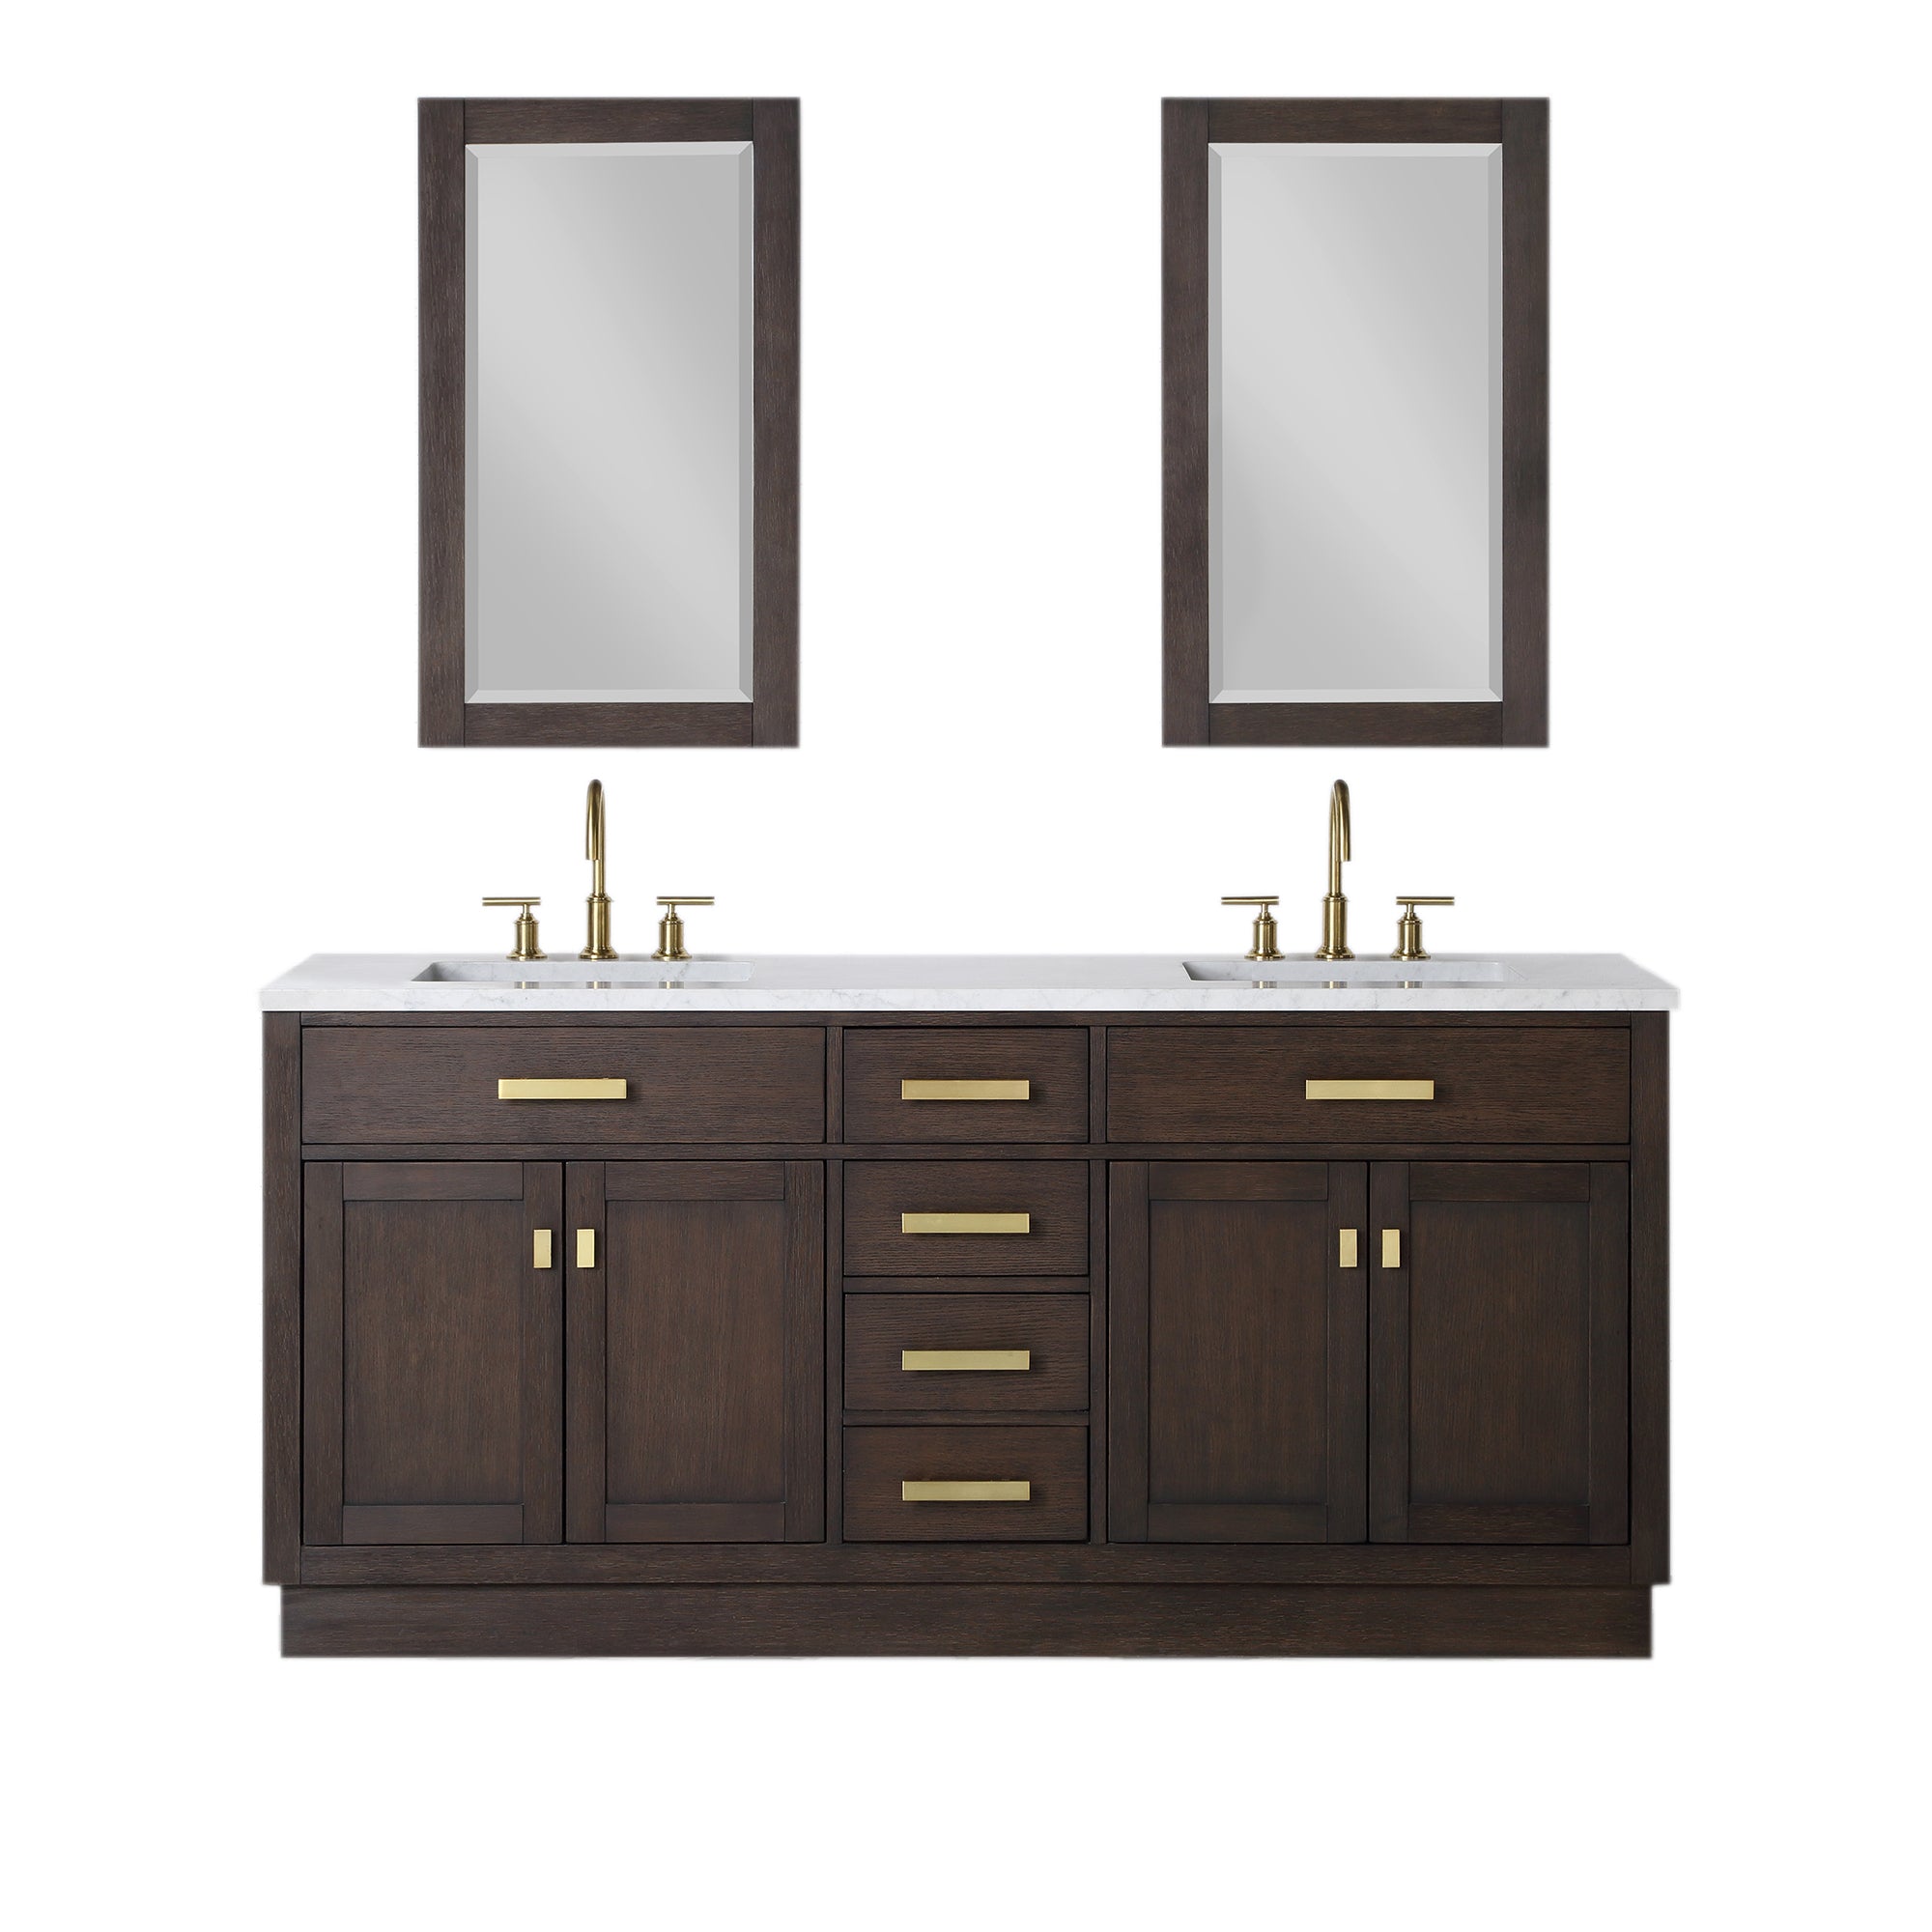 Water Creation | Chestnut 72 In. Double Sink Carrara White Marble Countertop Vanity In Brown Oak with Mirrors | CH72CW06BK-R21000000